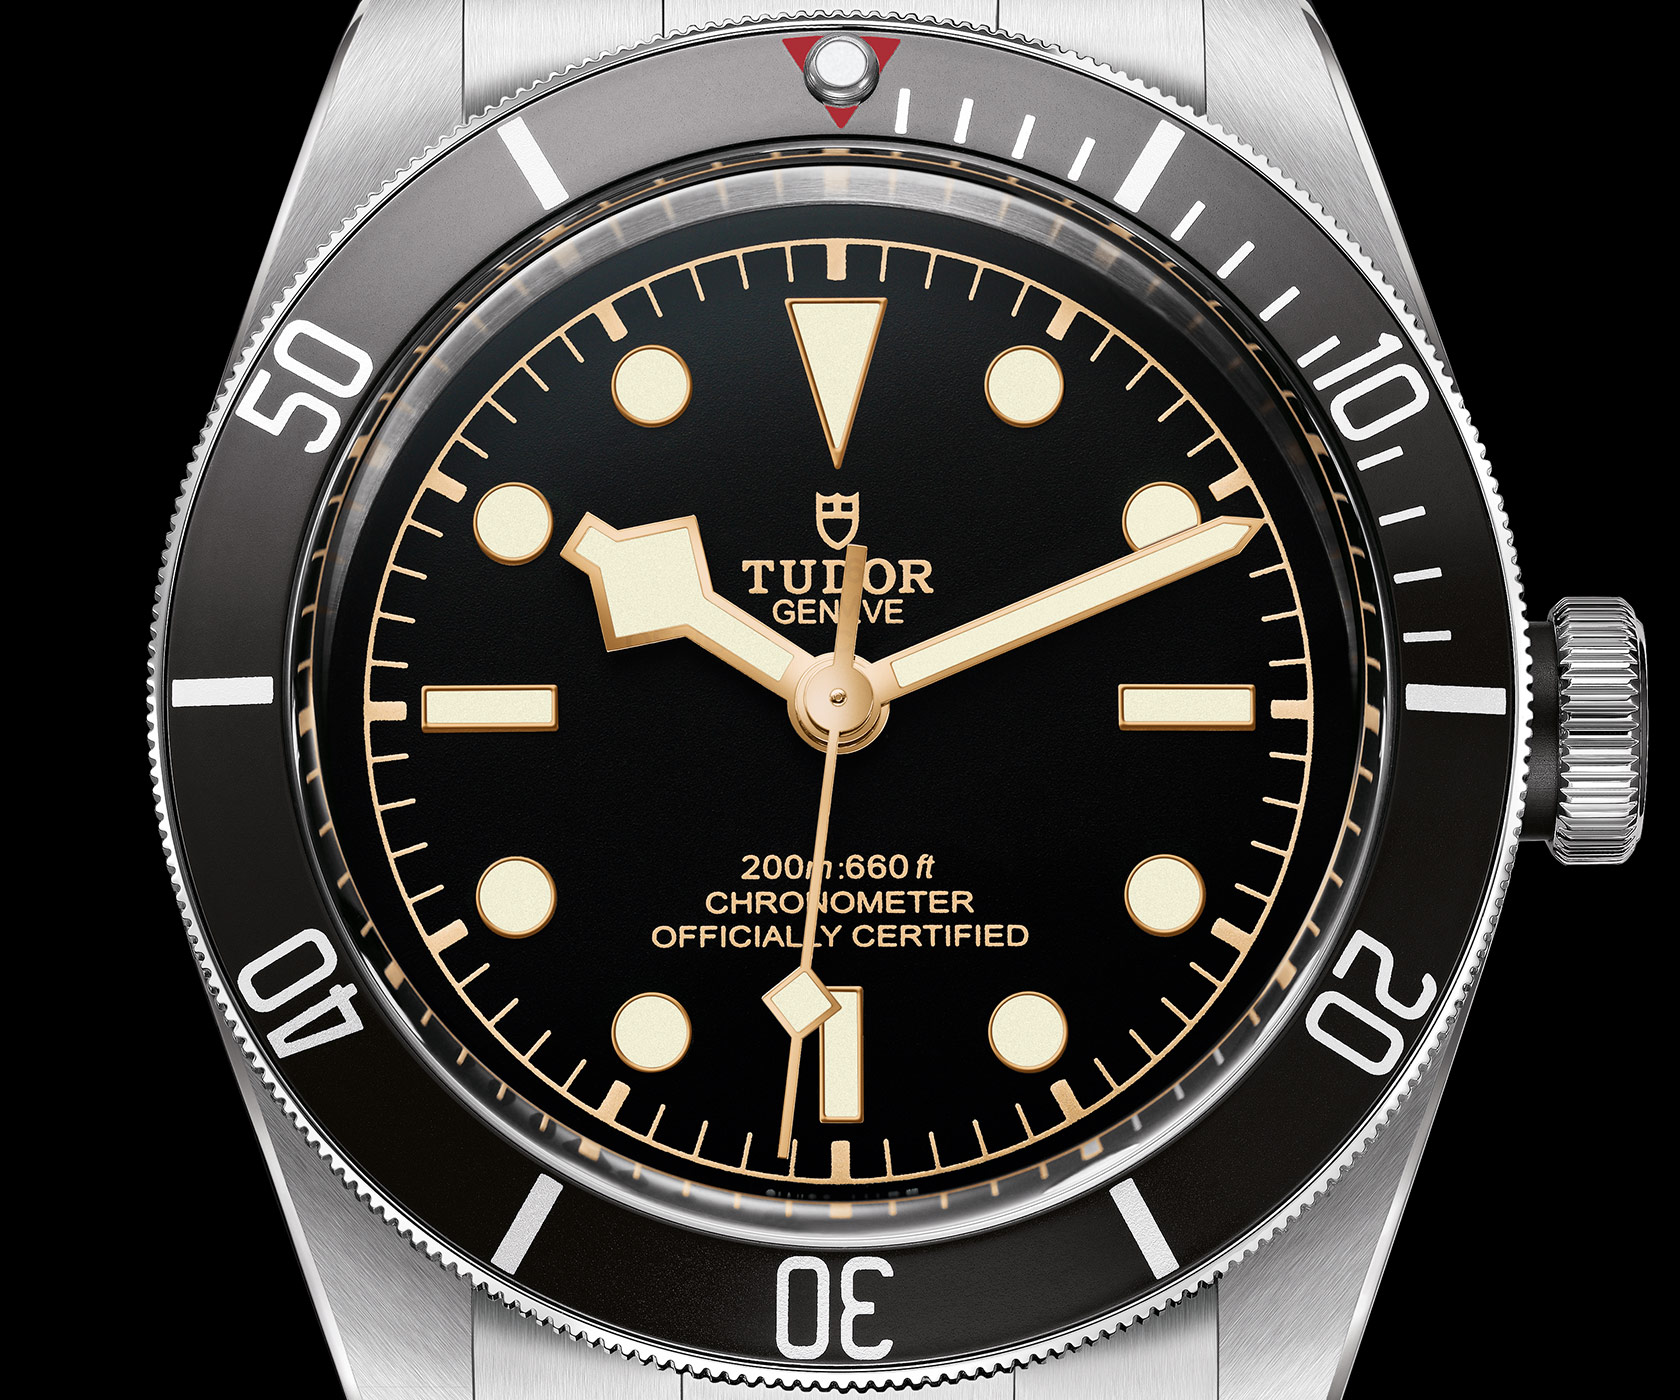 Is The Tudor Black Bay The Best Dive Watch For Your Money? [REVIEW]